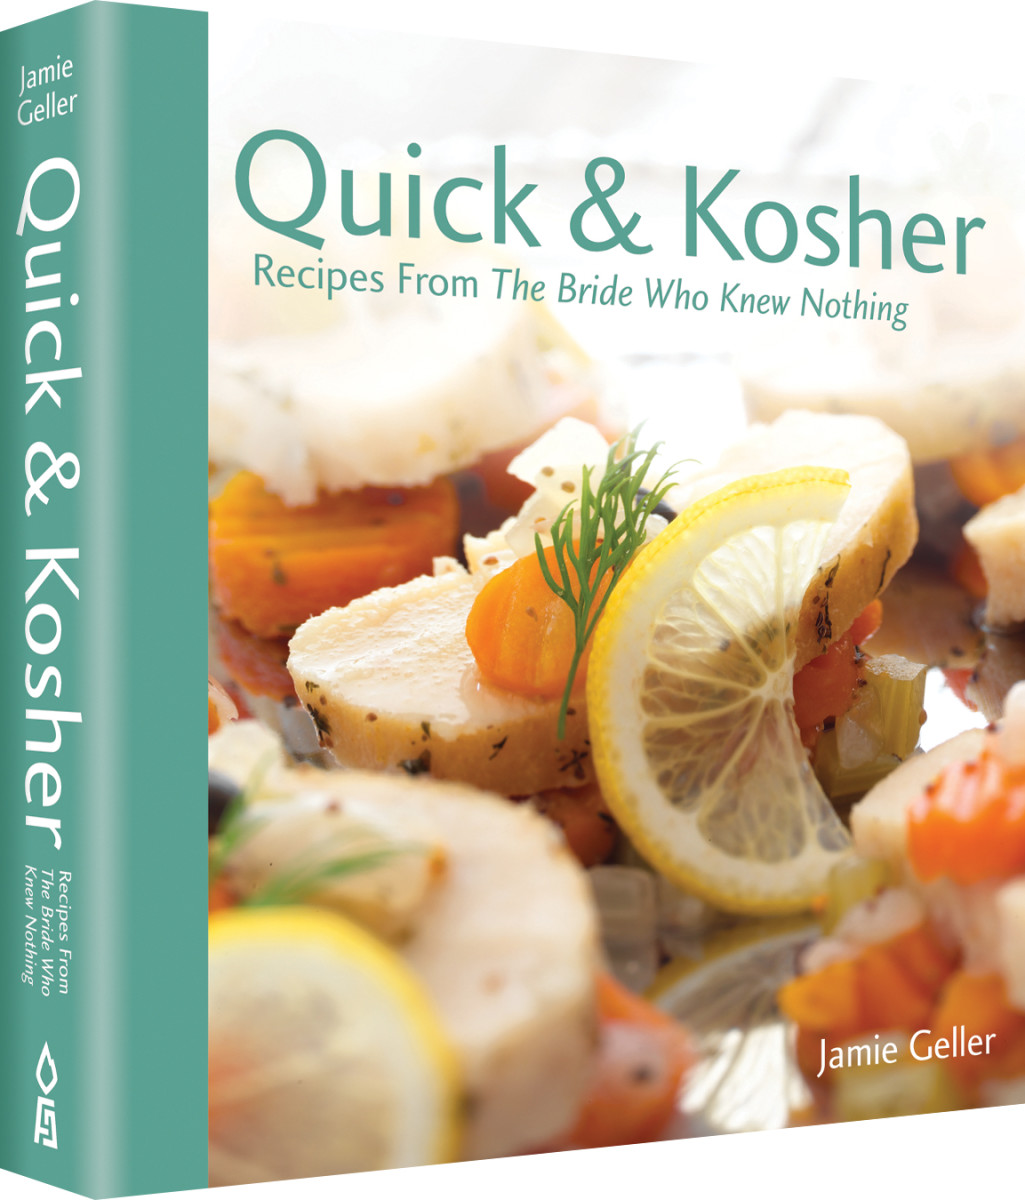 Quick & Kosher: Recipes From The Bride Who Knew Nothing